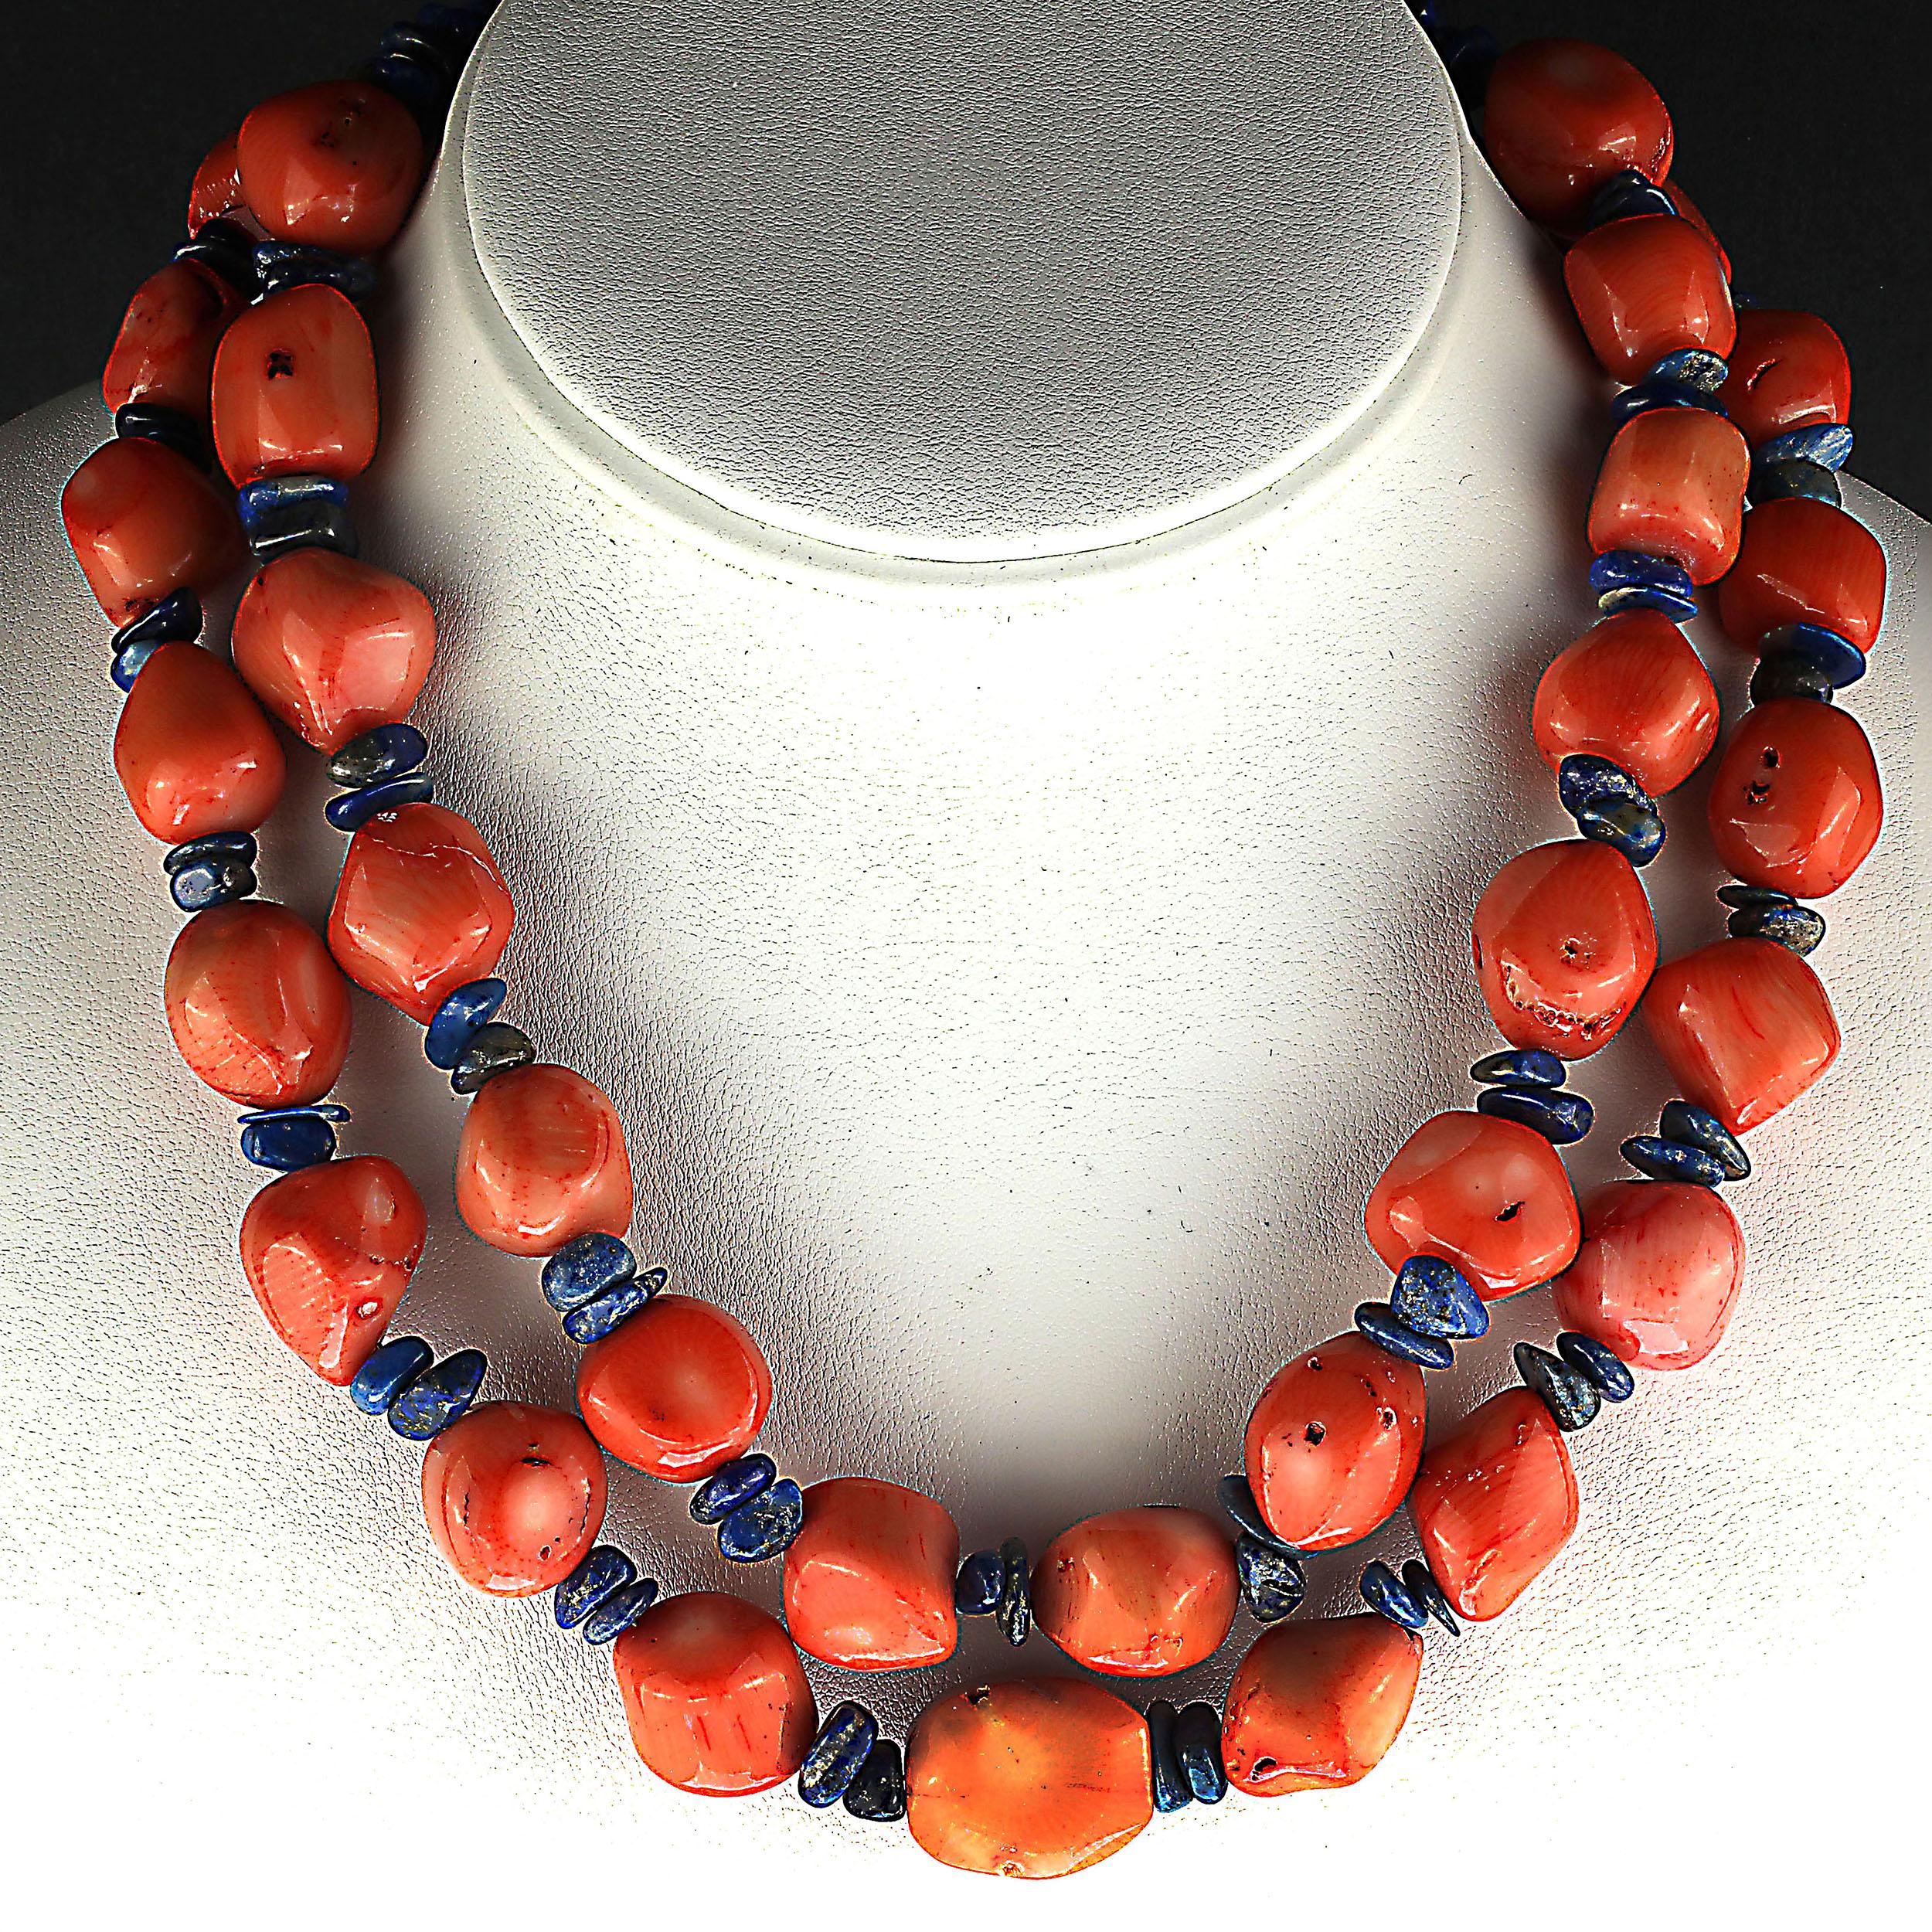 AJD Double Strand Necklace of Peach Coral and Lapis Lazuli 2